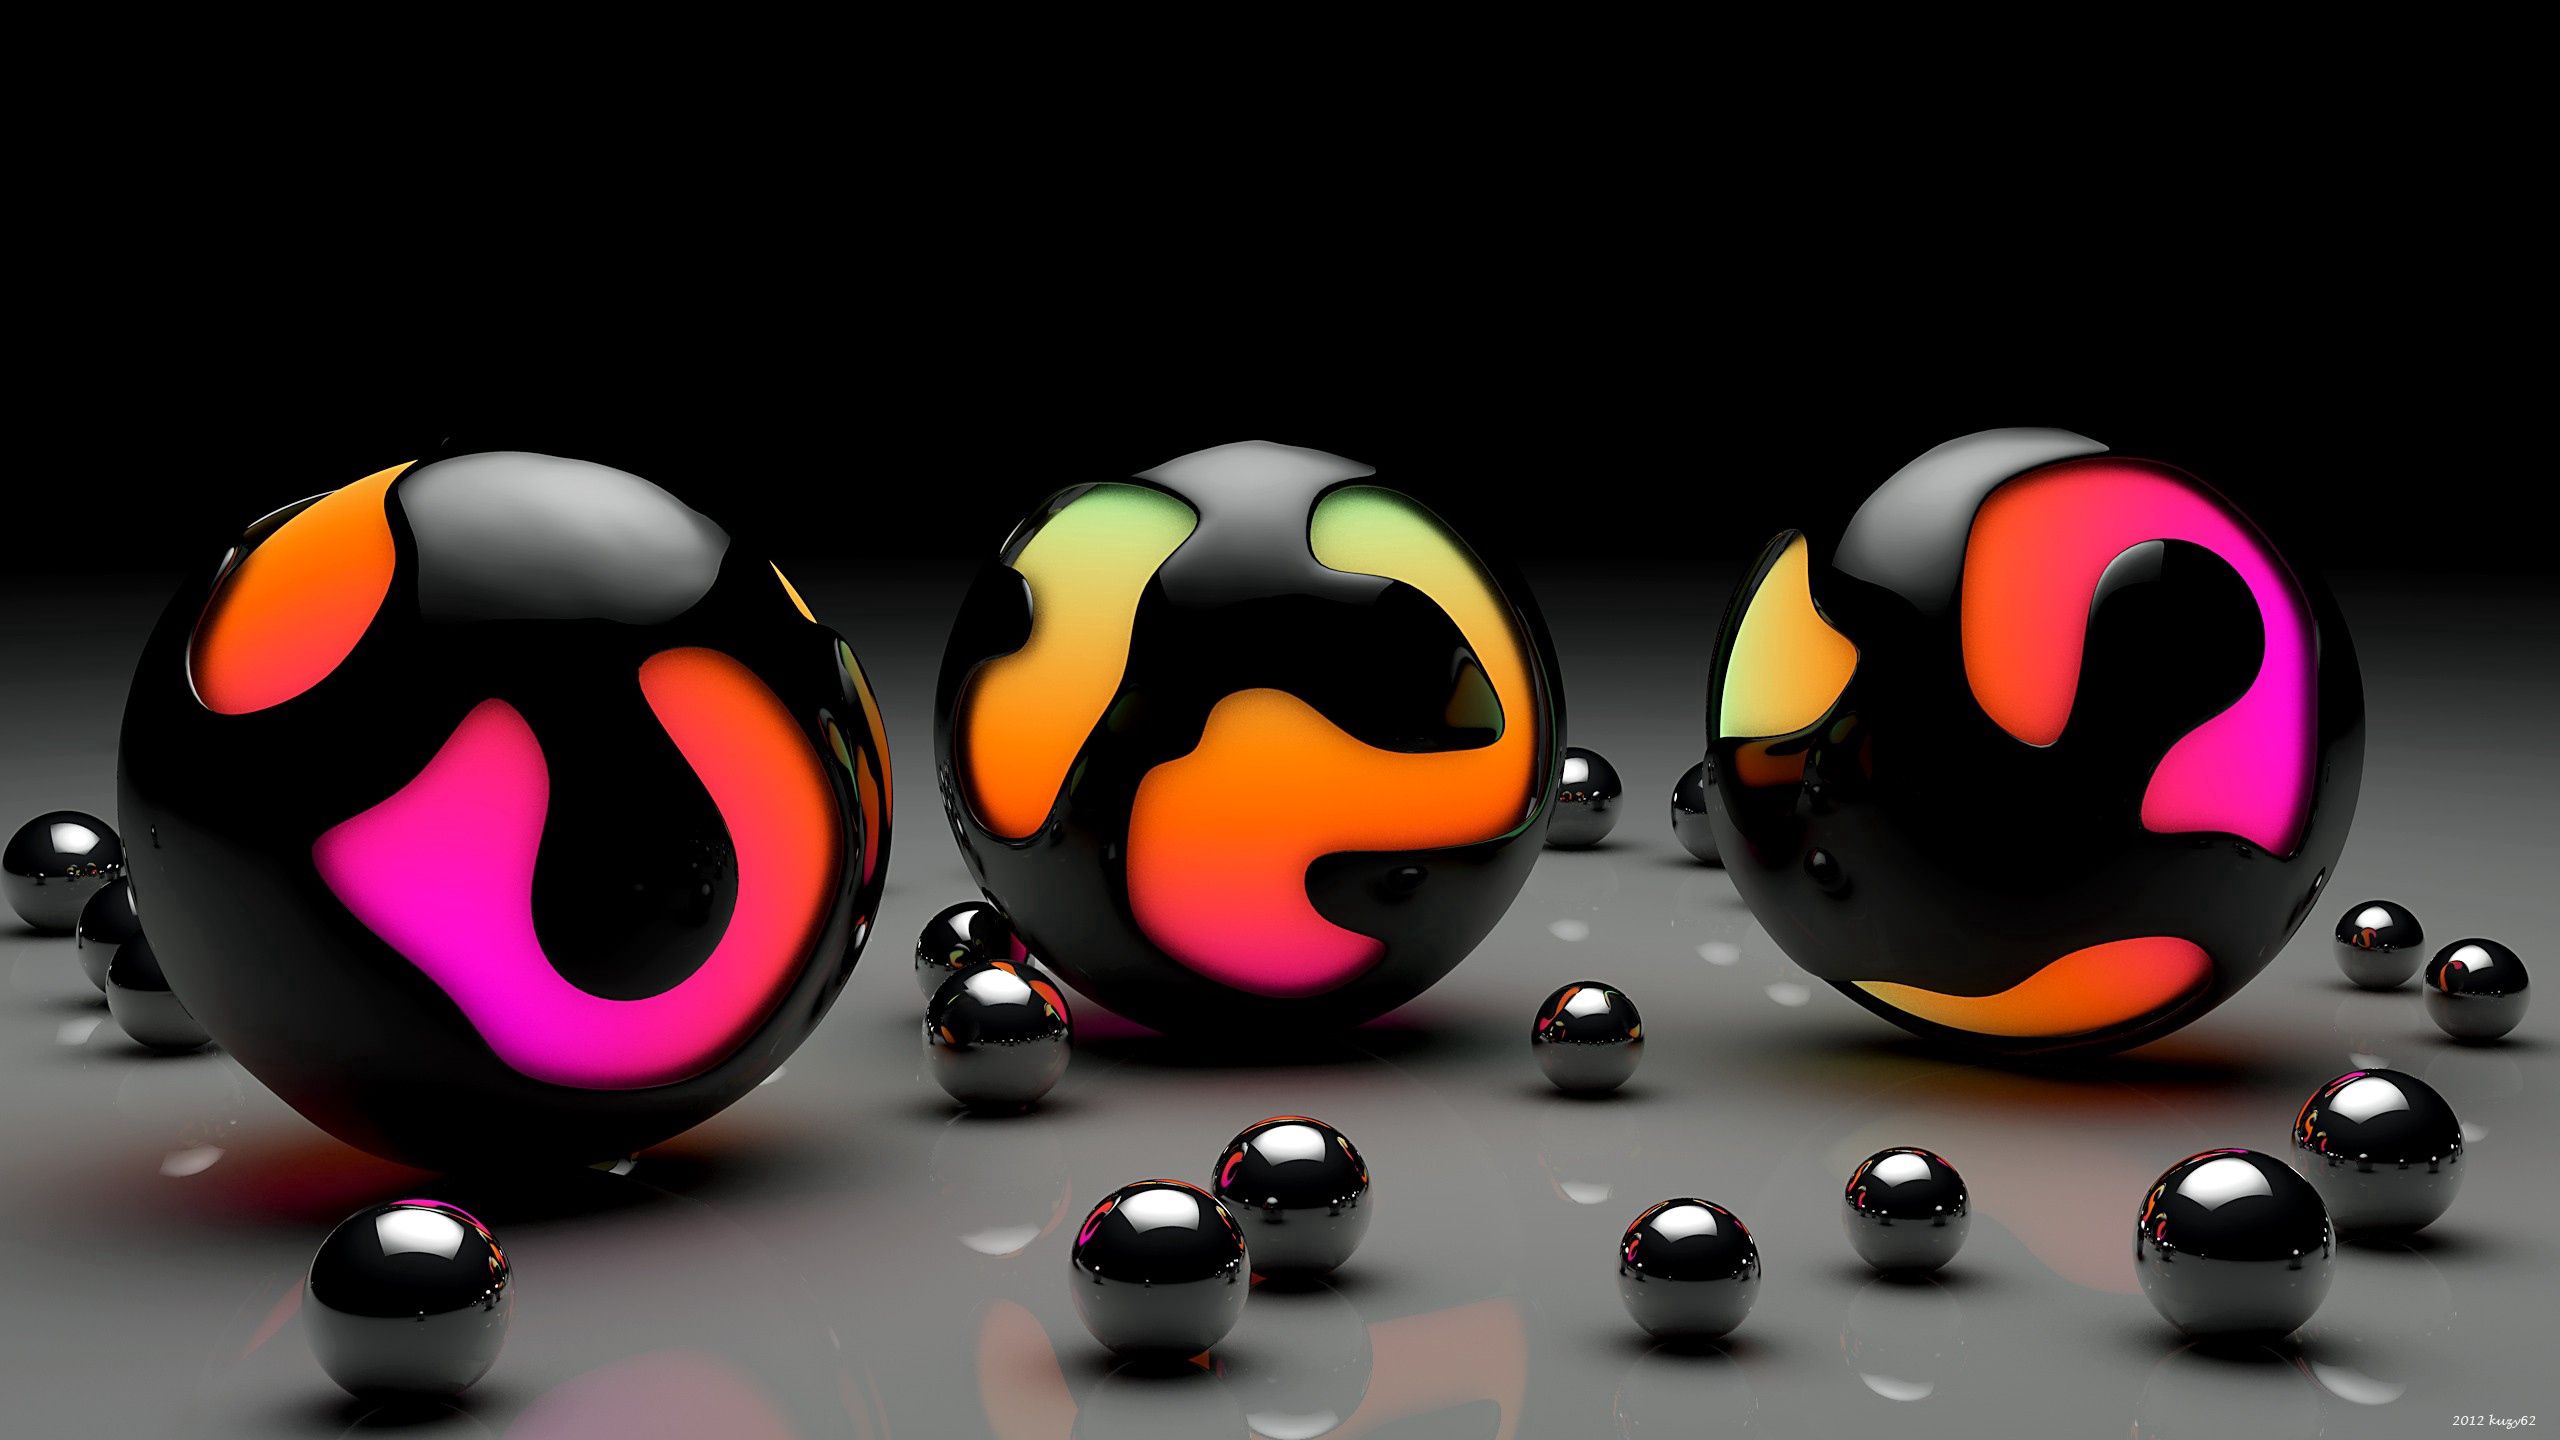 light, surface, balls, 3d, dimension, shine, dimensions (edit), lots of, multitude cell phone wallpapers